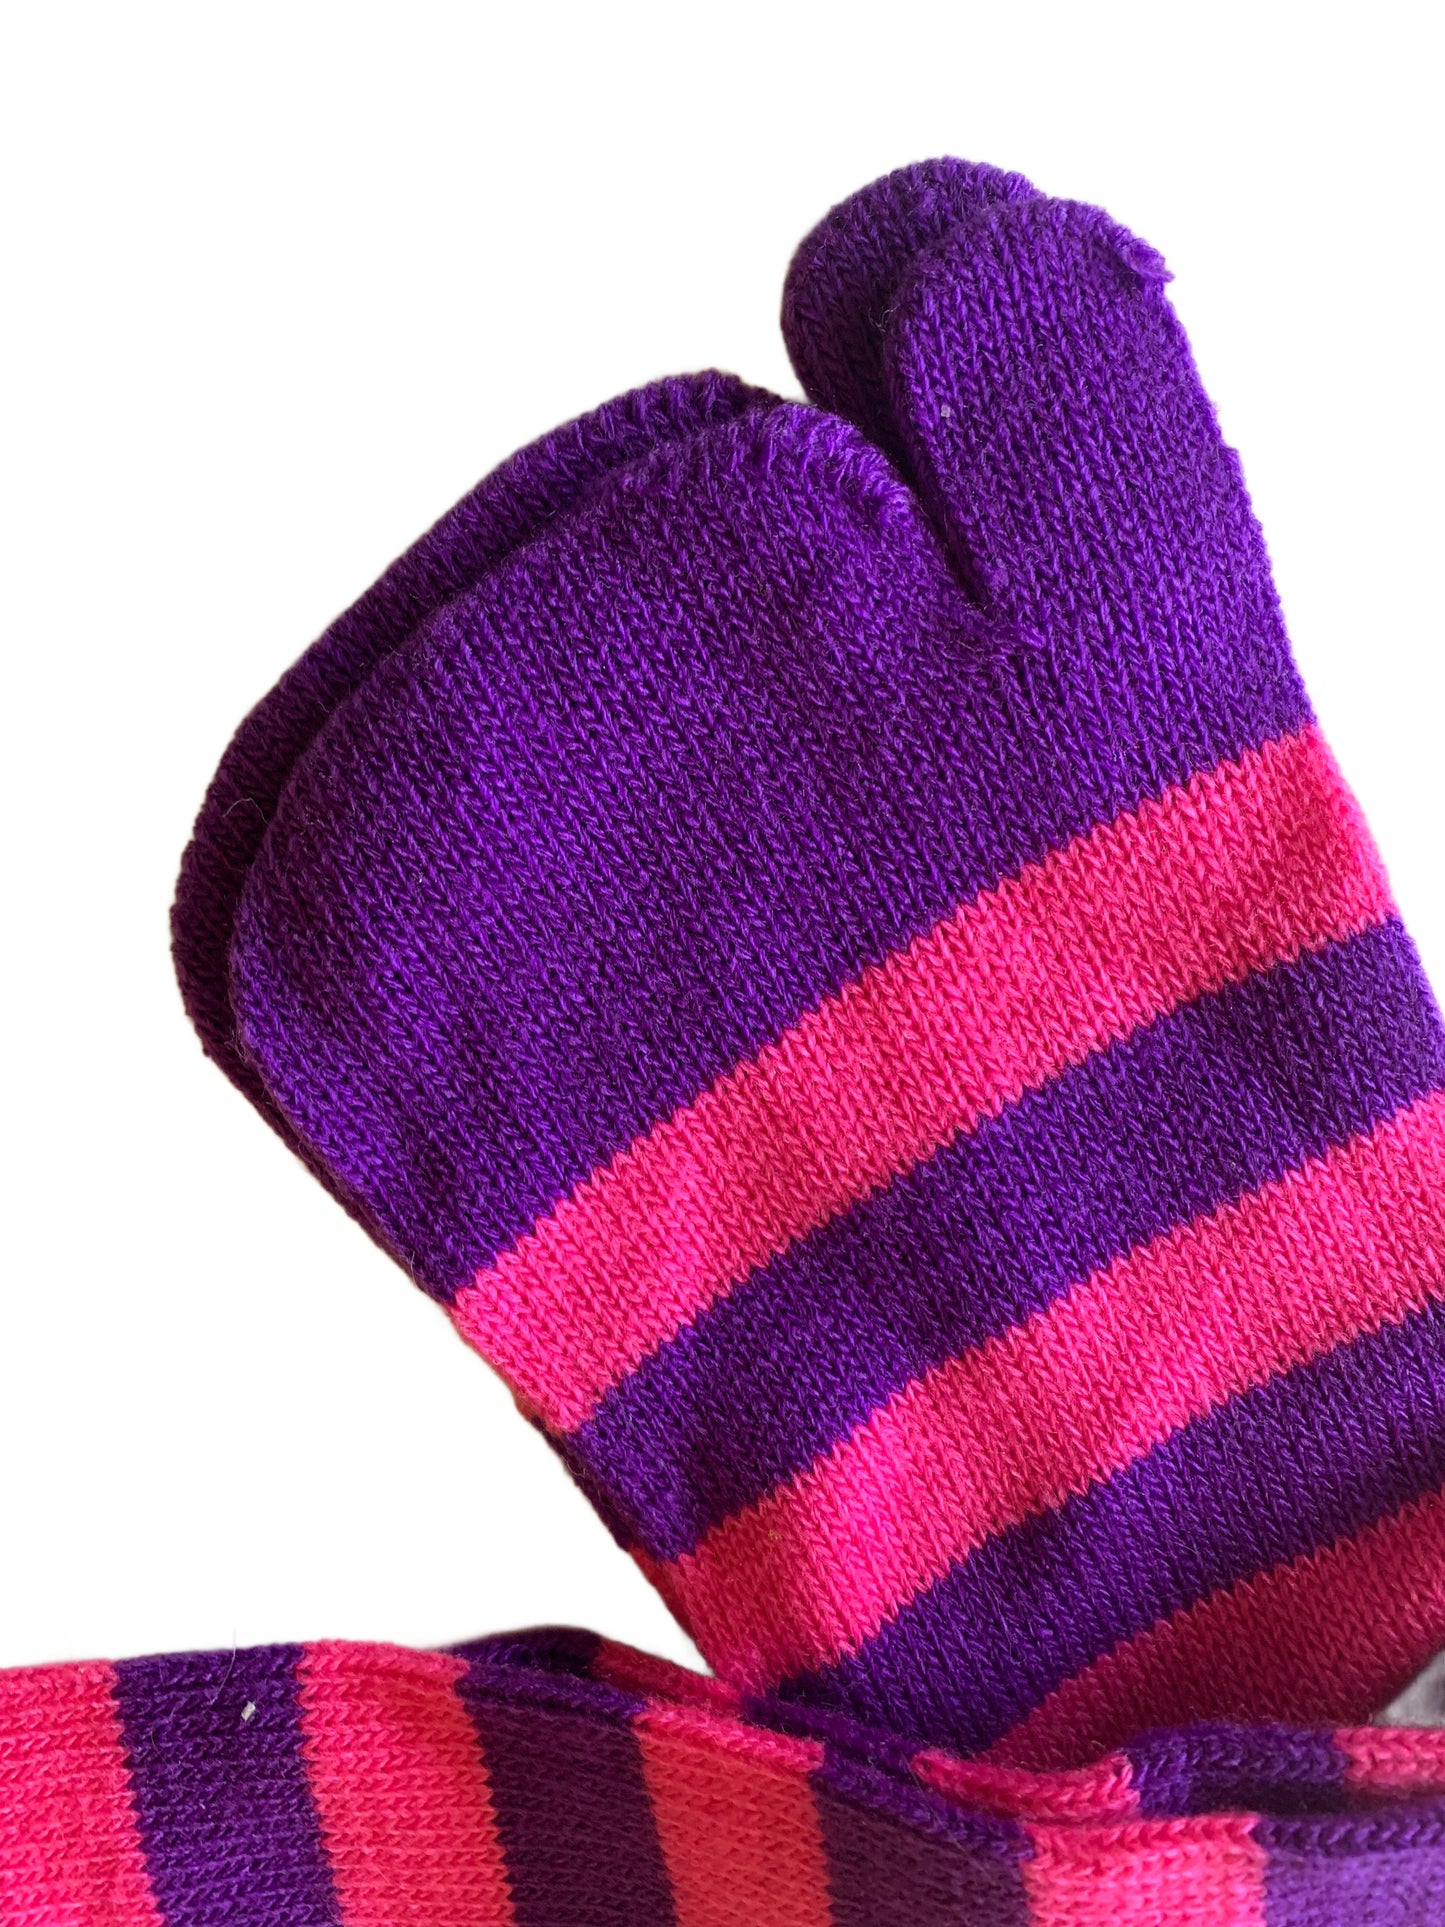 Hot Pink and Purple Striped One Toe Socks circa 1980s